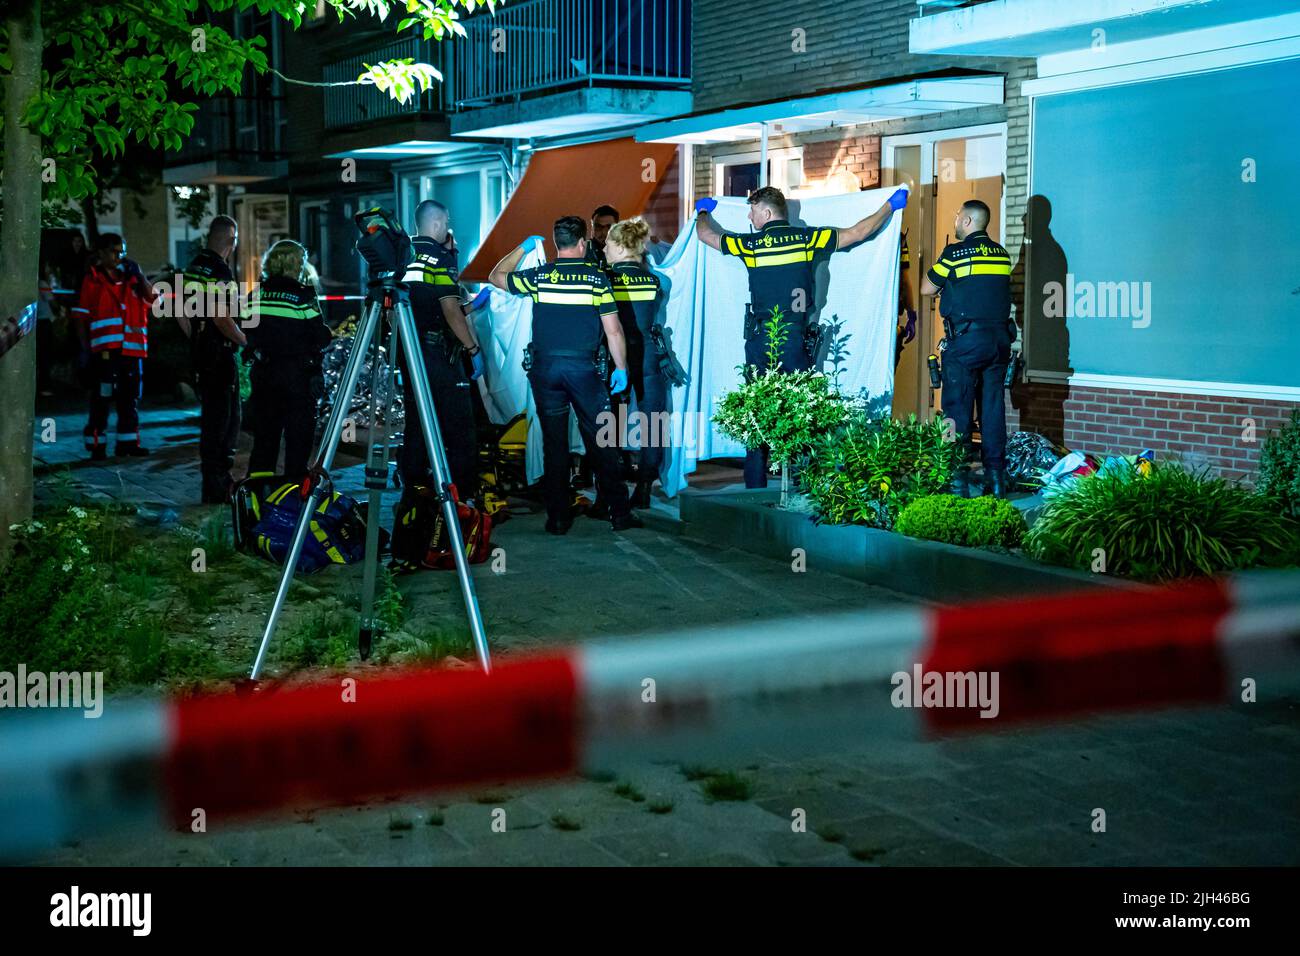 Dordrecht, Belgium. 15th July, 2022. 2022-07-15 02:05:50 DORDRECHT - Five people were injured in a stabbing at a house on Seringenstraat. Three of them are children. They are all under ten years old. The other injured are a 53-year-old man and a 39-year-old woman. The woman has been arrested as a suspect. All have been transported to hospital. ANP MEDIATV netherlands out - belgium out Credit: ANP/Alamy Live News Stock Photo